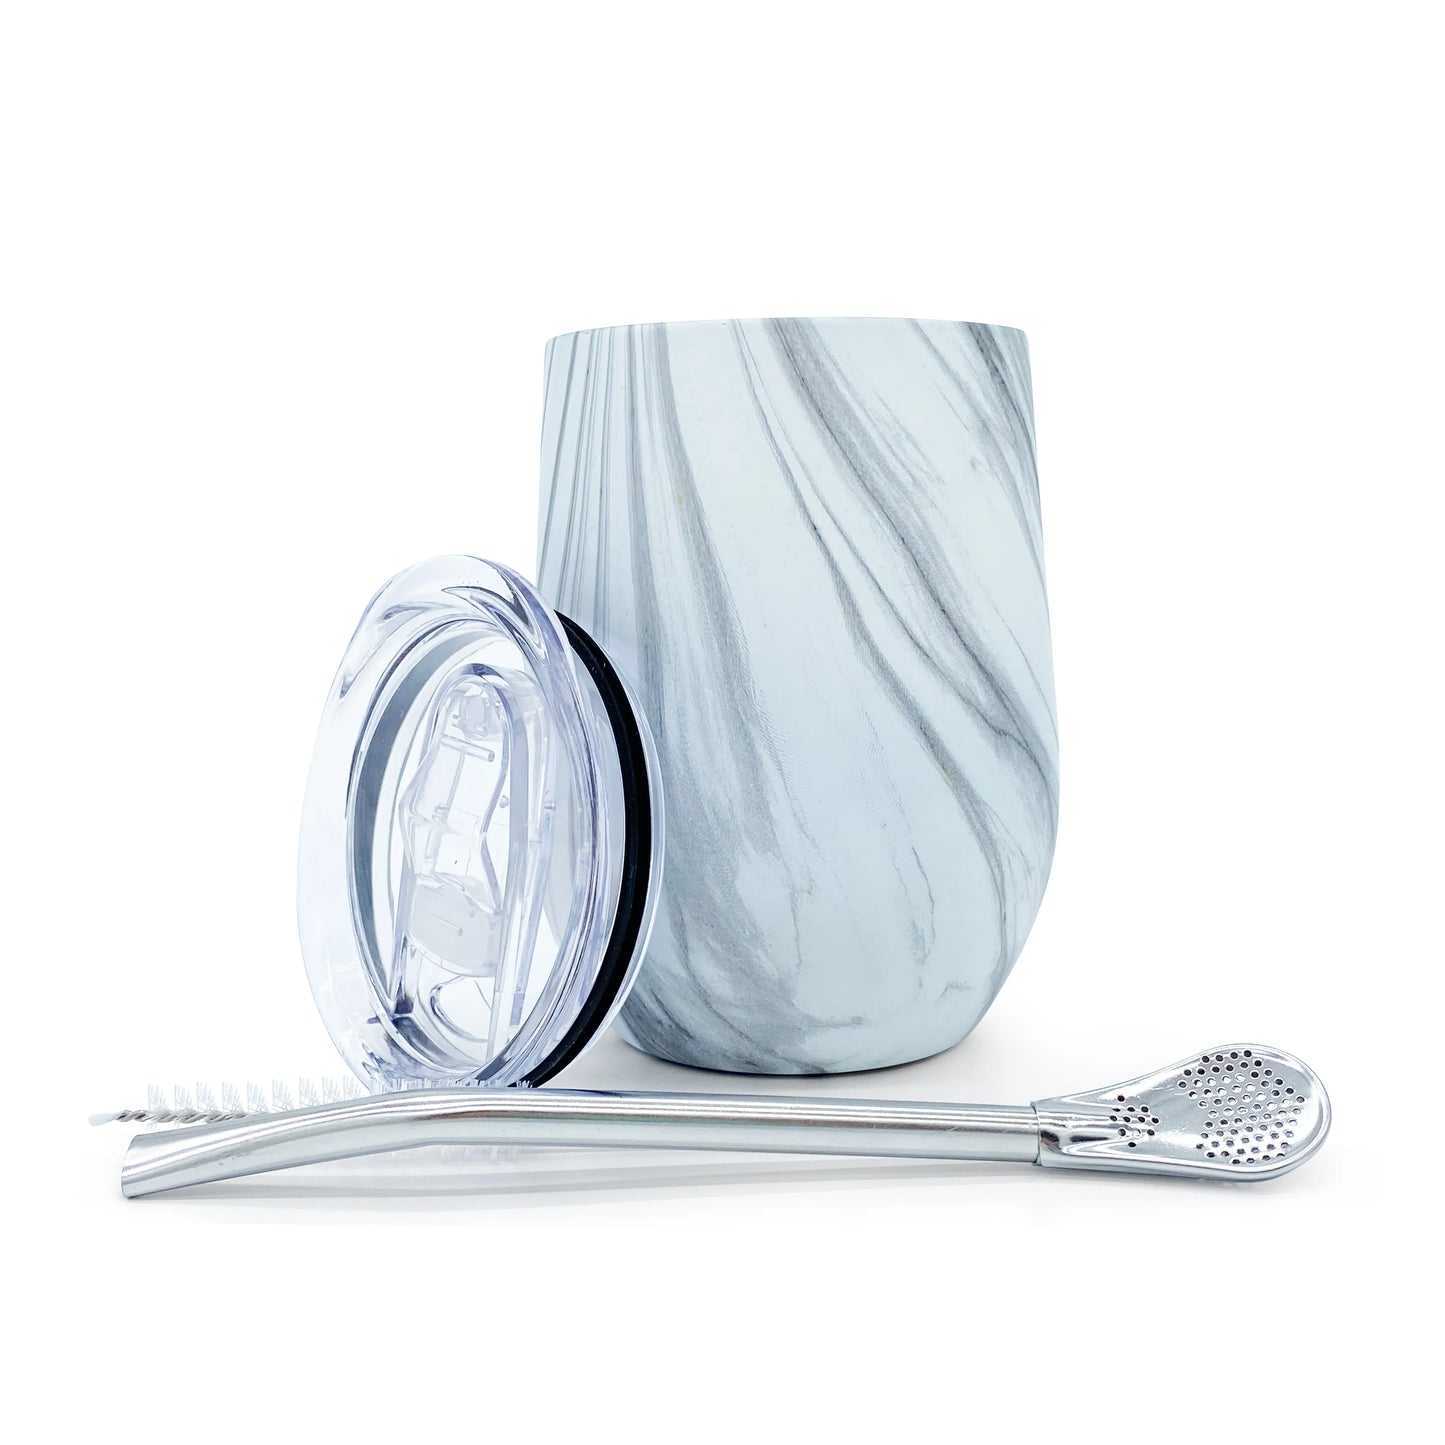 Marble Mate Calabash with Bombilla, Stainless Steel Mate Cup. 